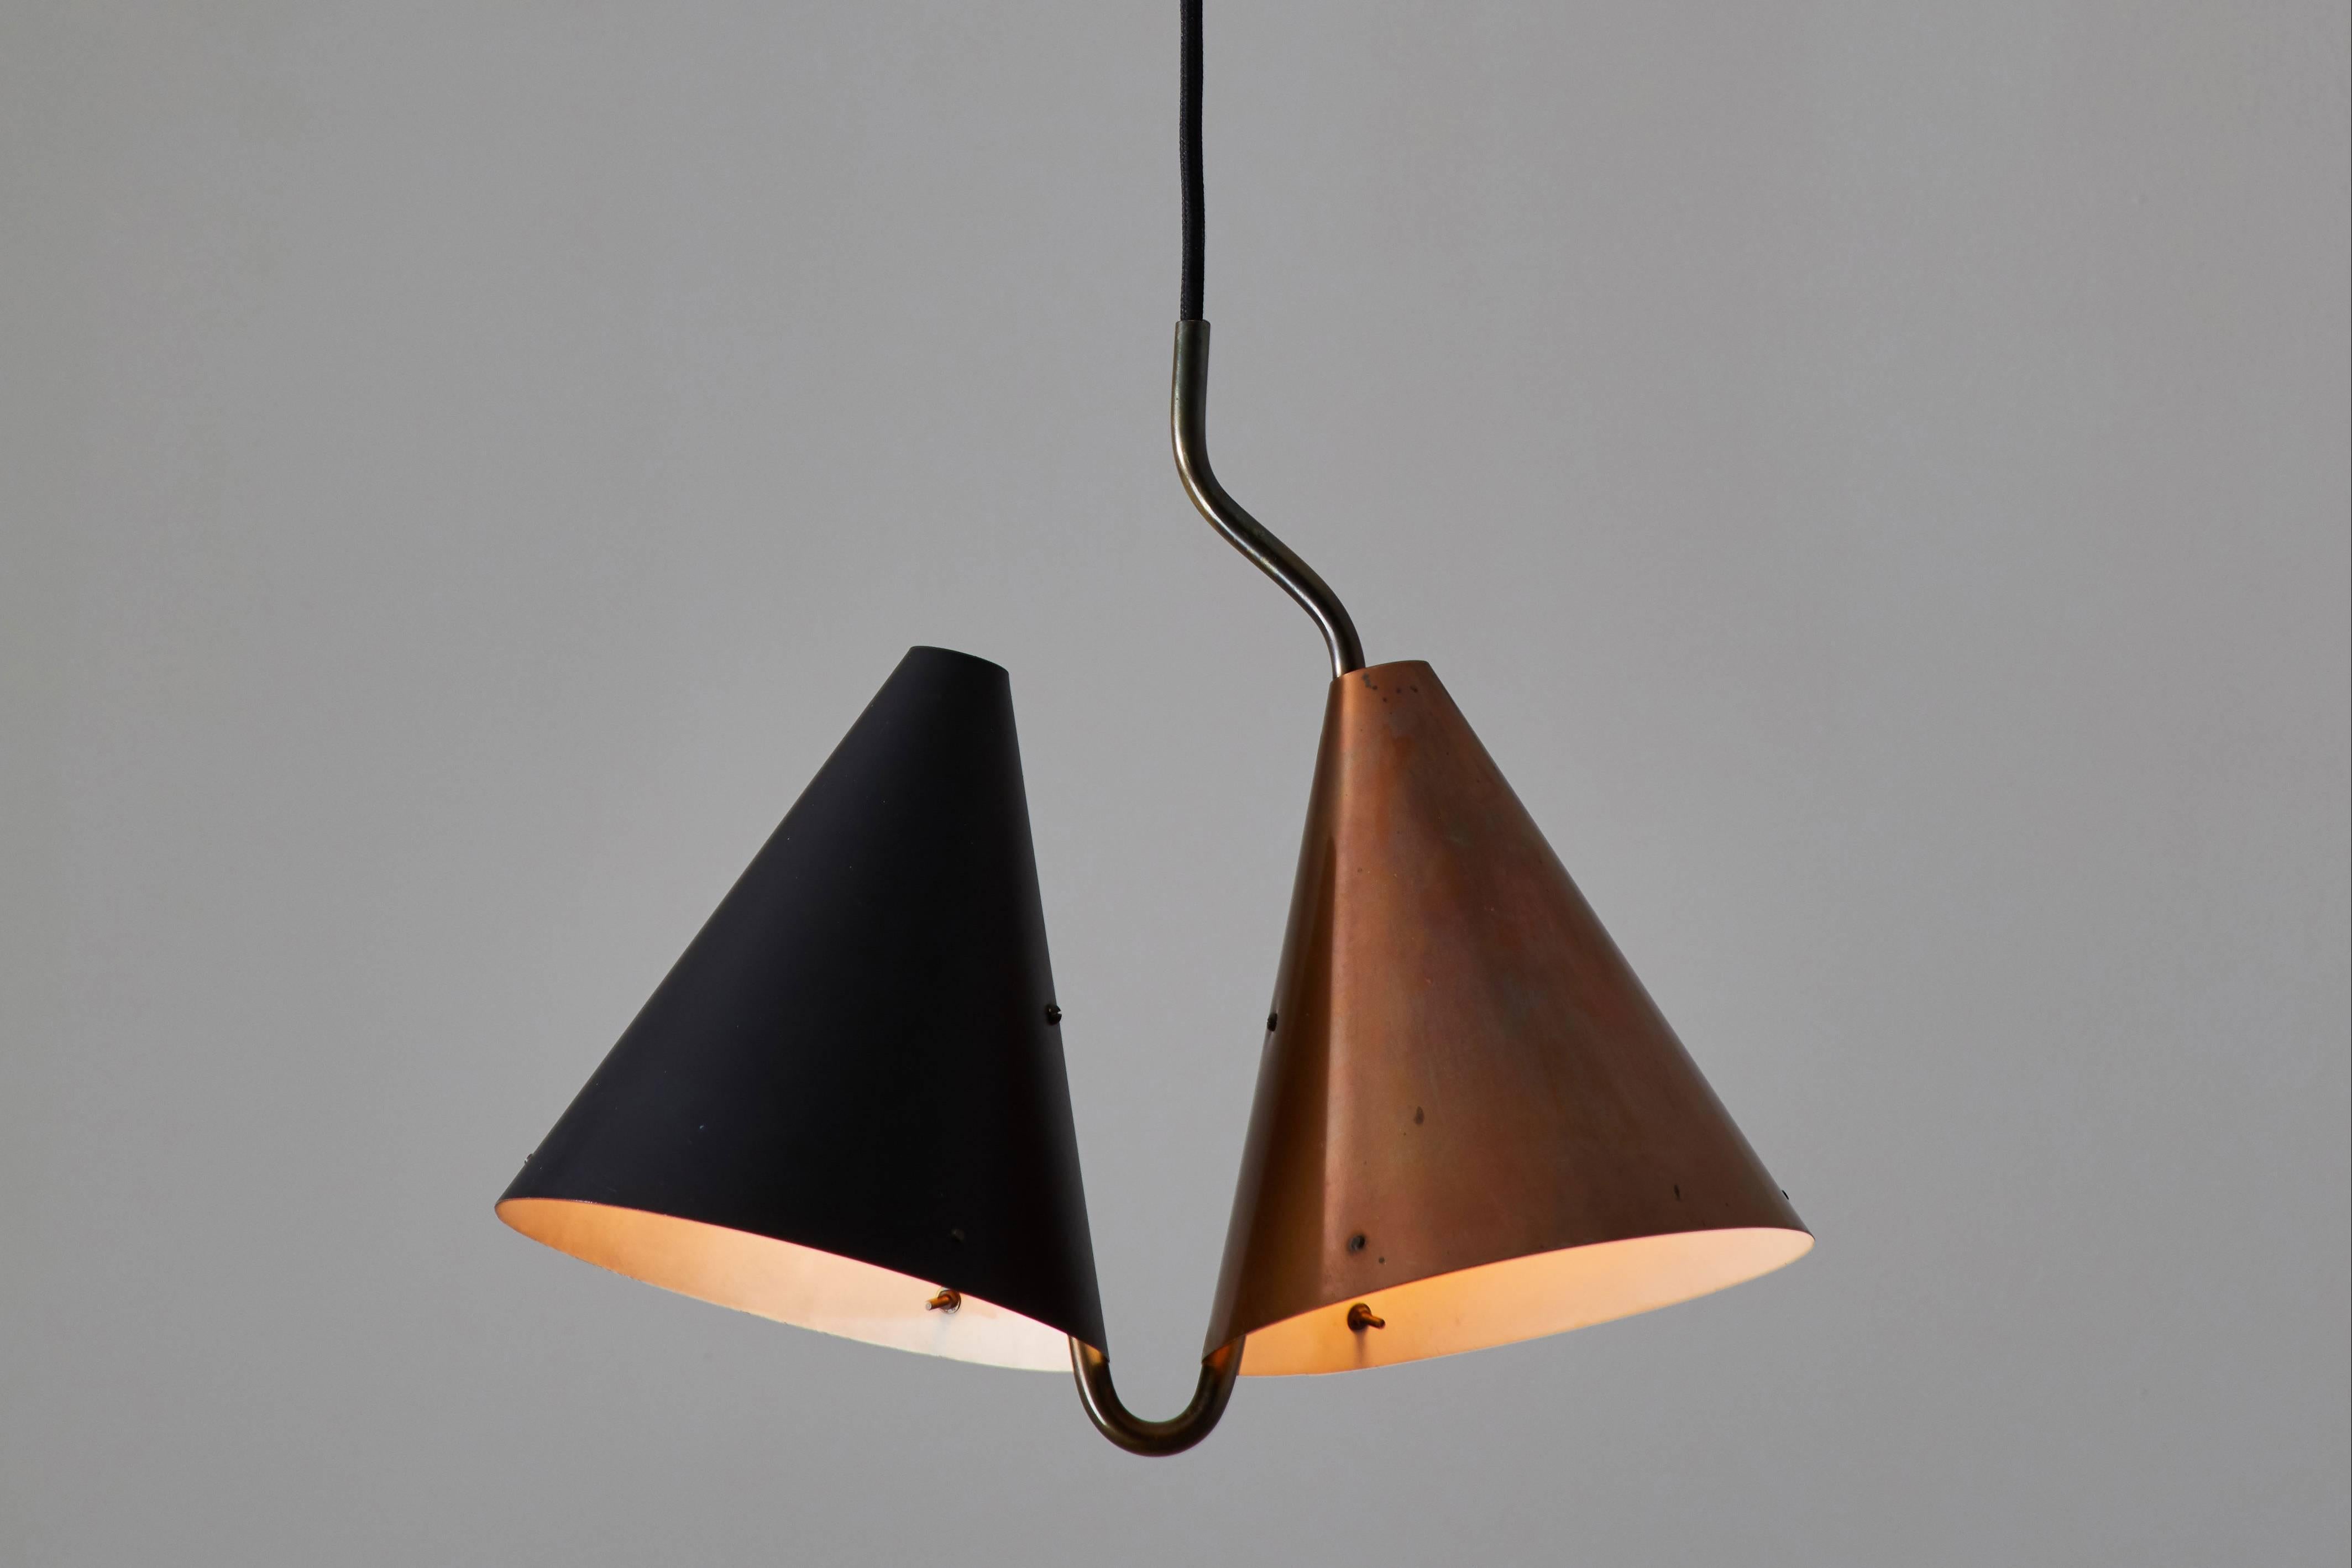 Rare double pendant lamp designed by Svend Aage Holm Sørensen, manufactured by Lyfa in Denmark in 1955. Enameled steel and copper plated brass. Wired for US junction boxes. Custom brass canopy. Takes two E-27 75w maximum bulbs